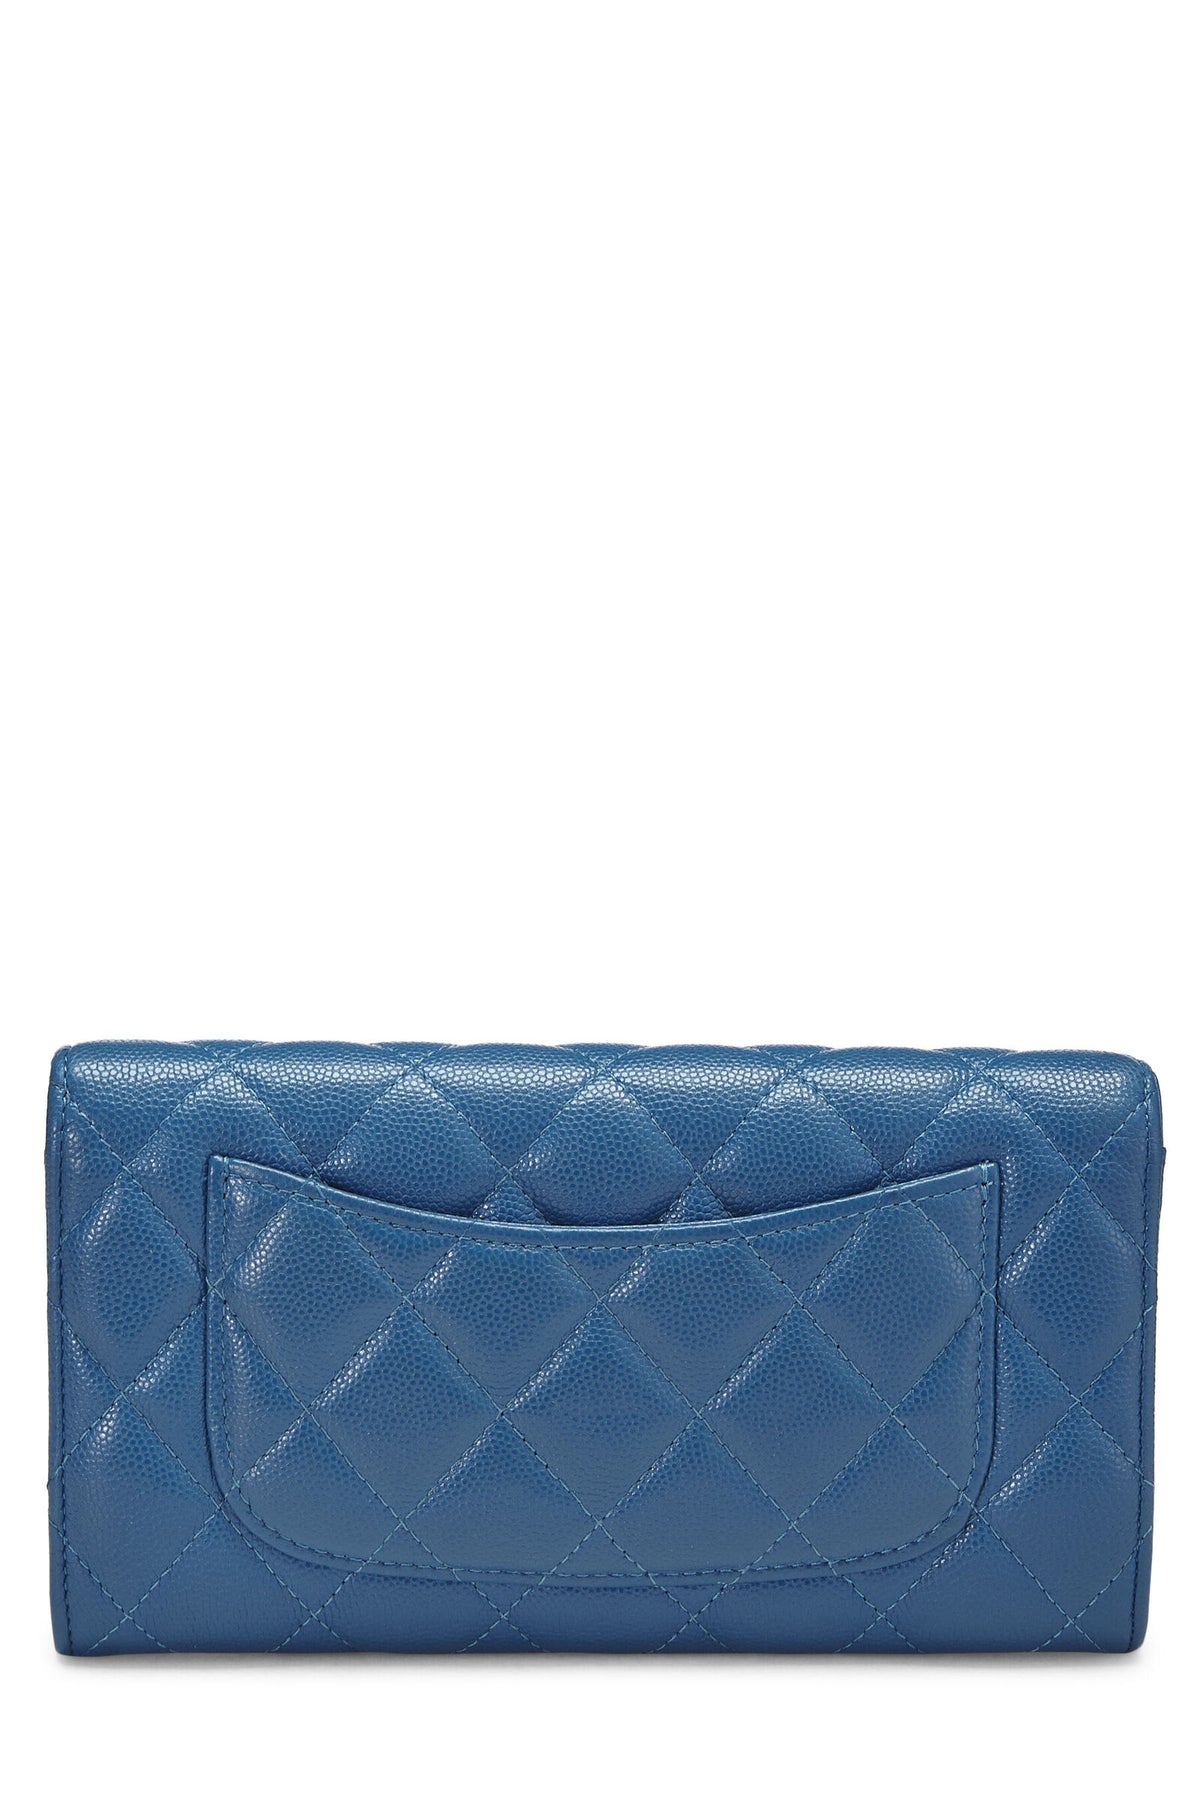 CHANEL CAVIAR QUILTED LAMBSKIN CLASSIC FLAP WALLET – Caroline's